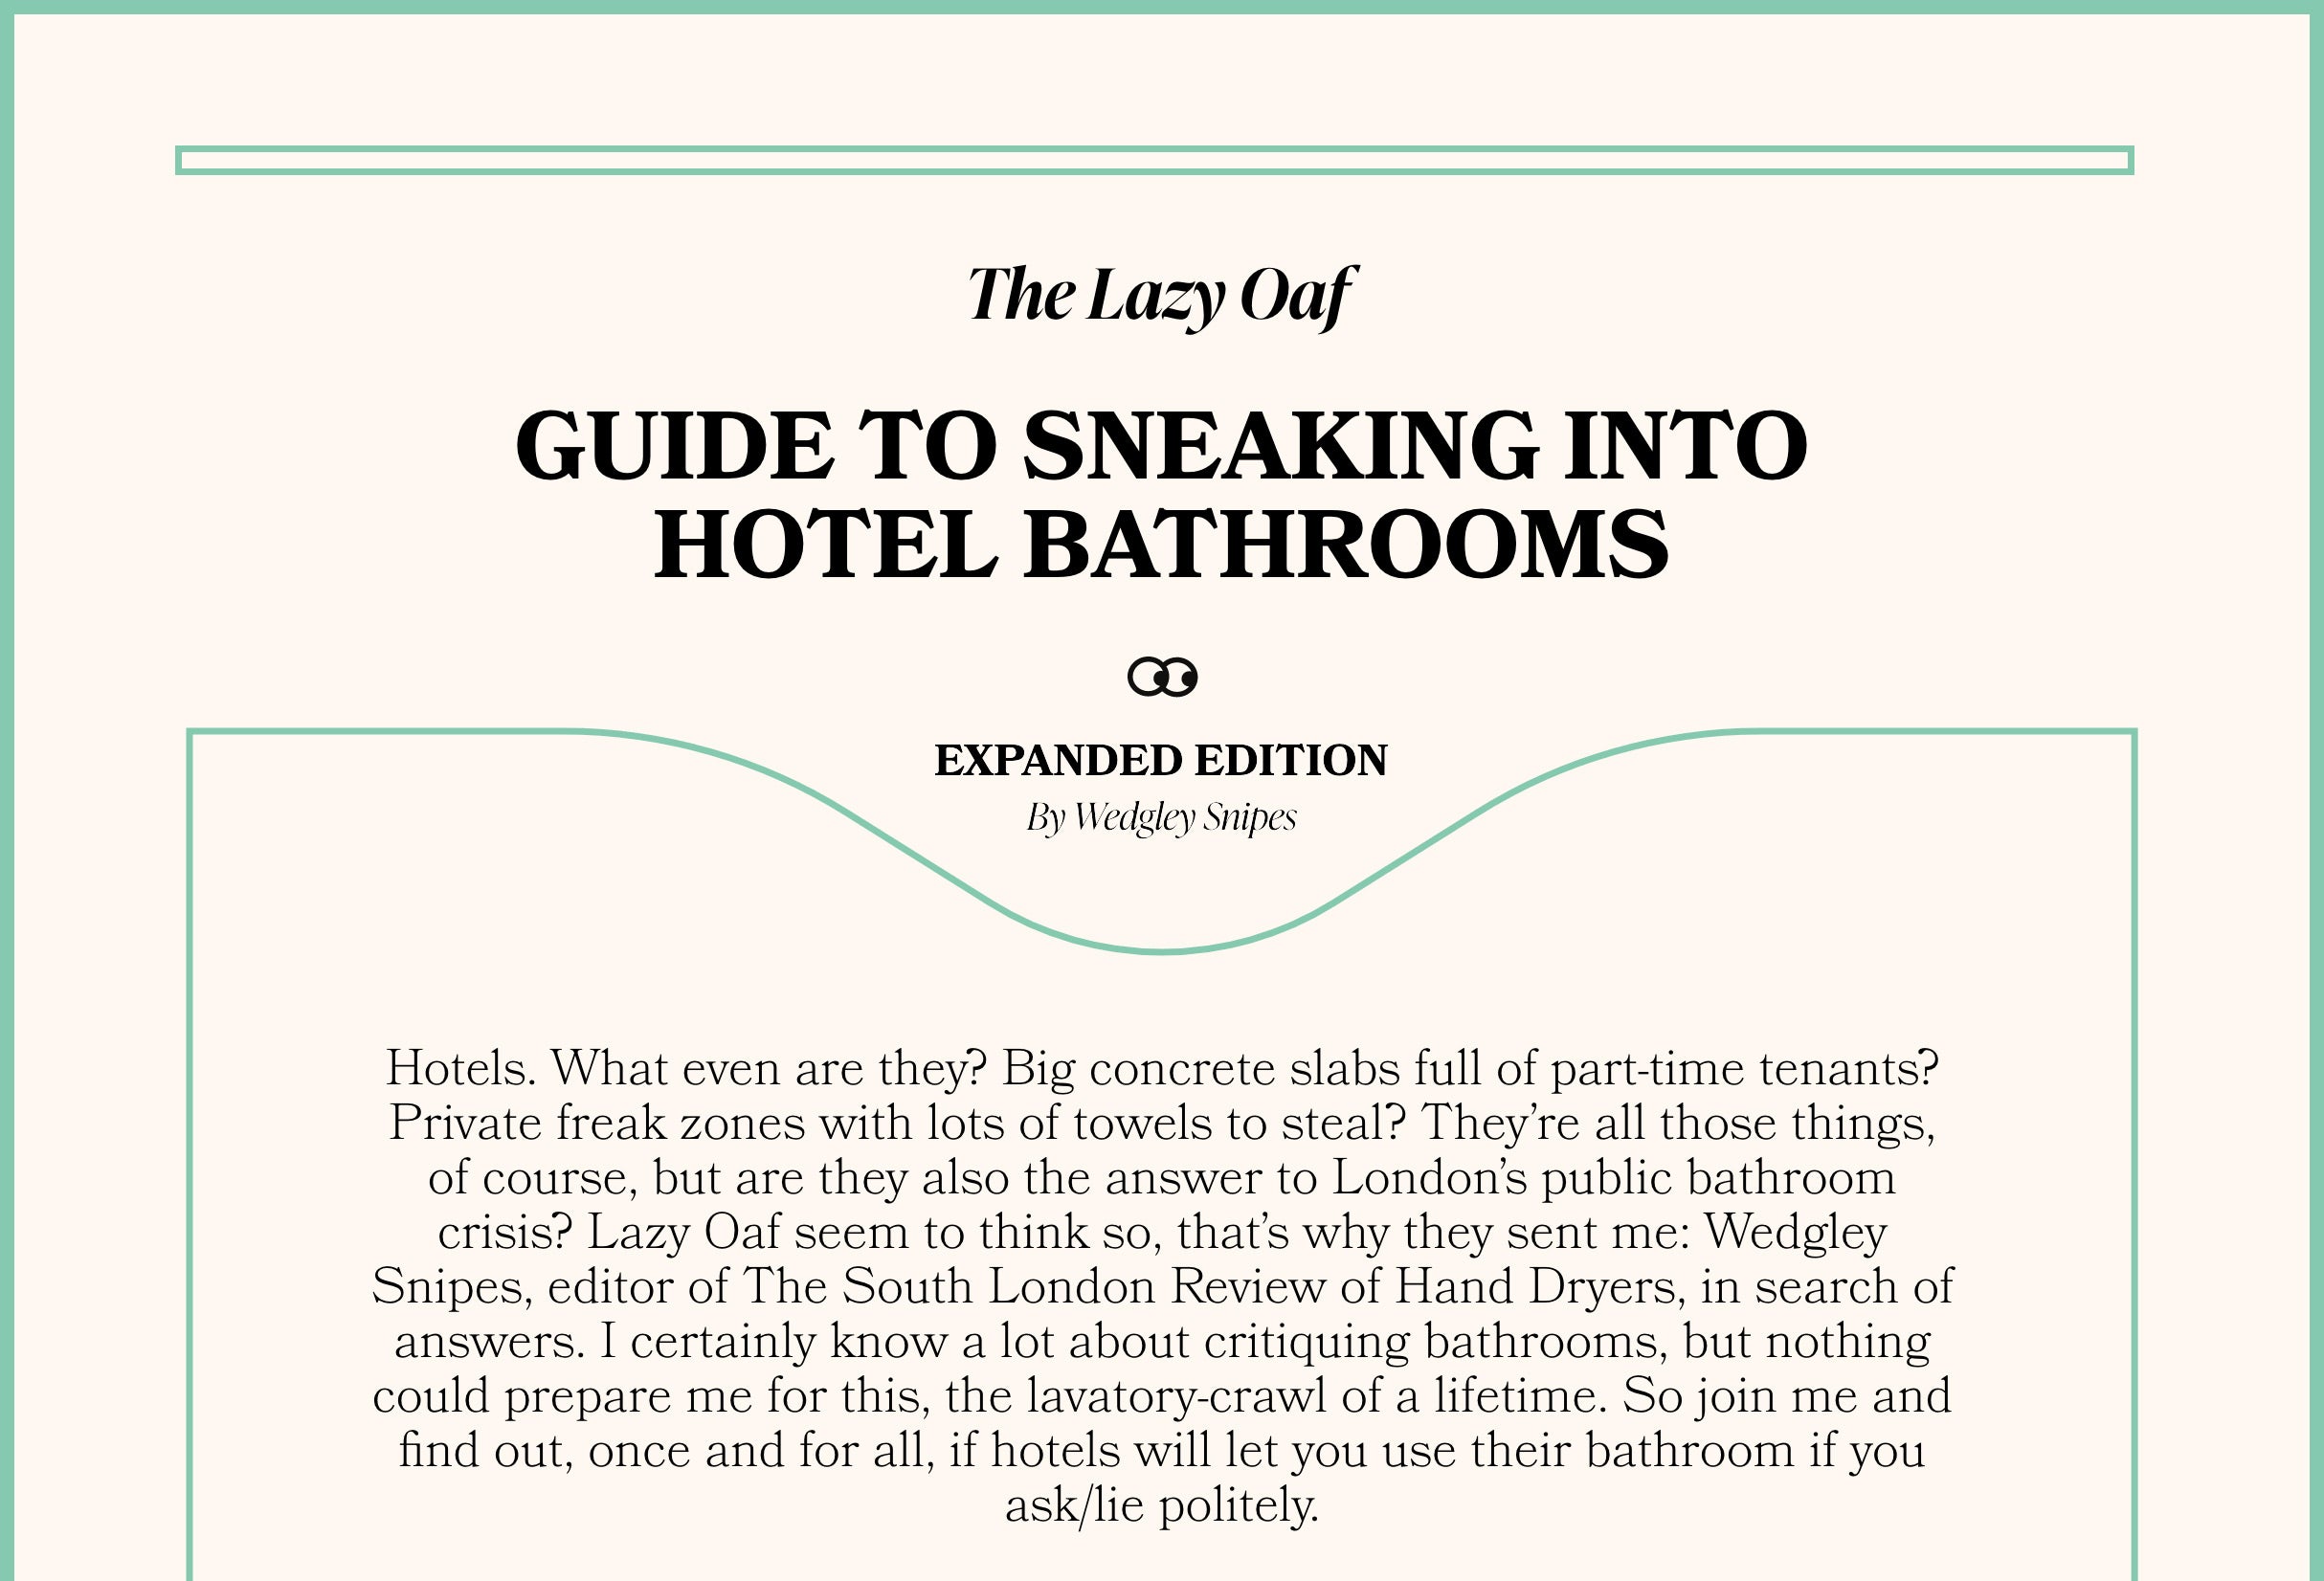 The Lazy Oaf Guide to Sneaking into Hotel Bathrooms